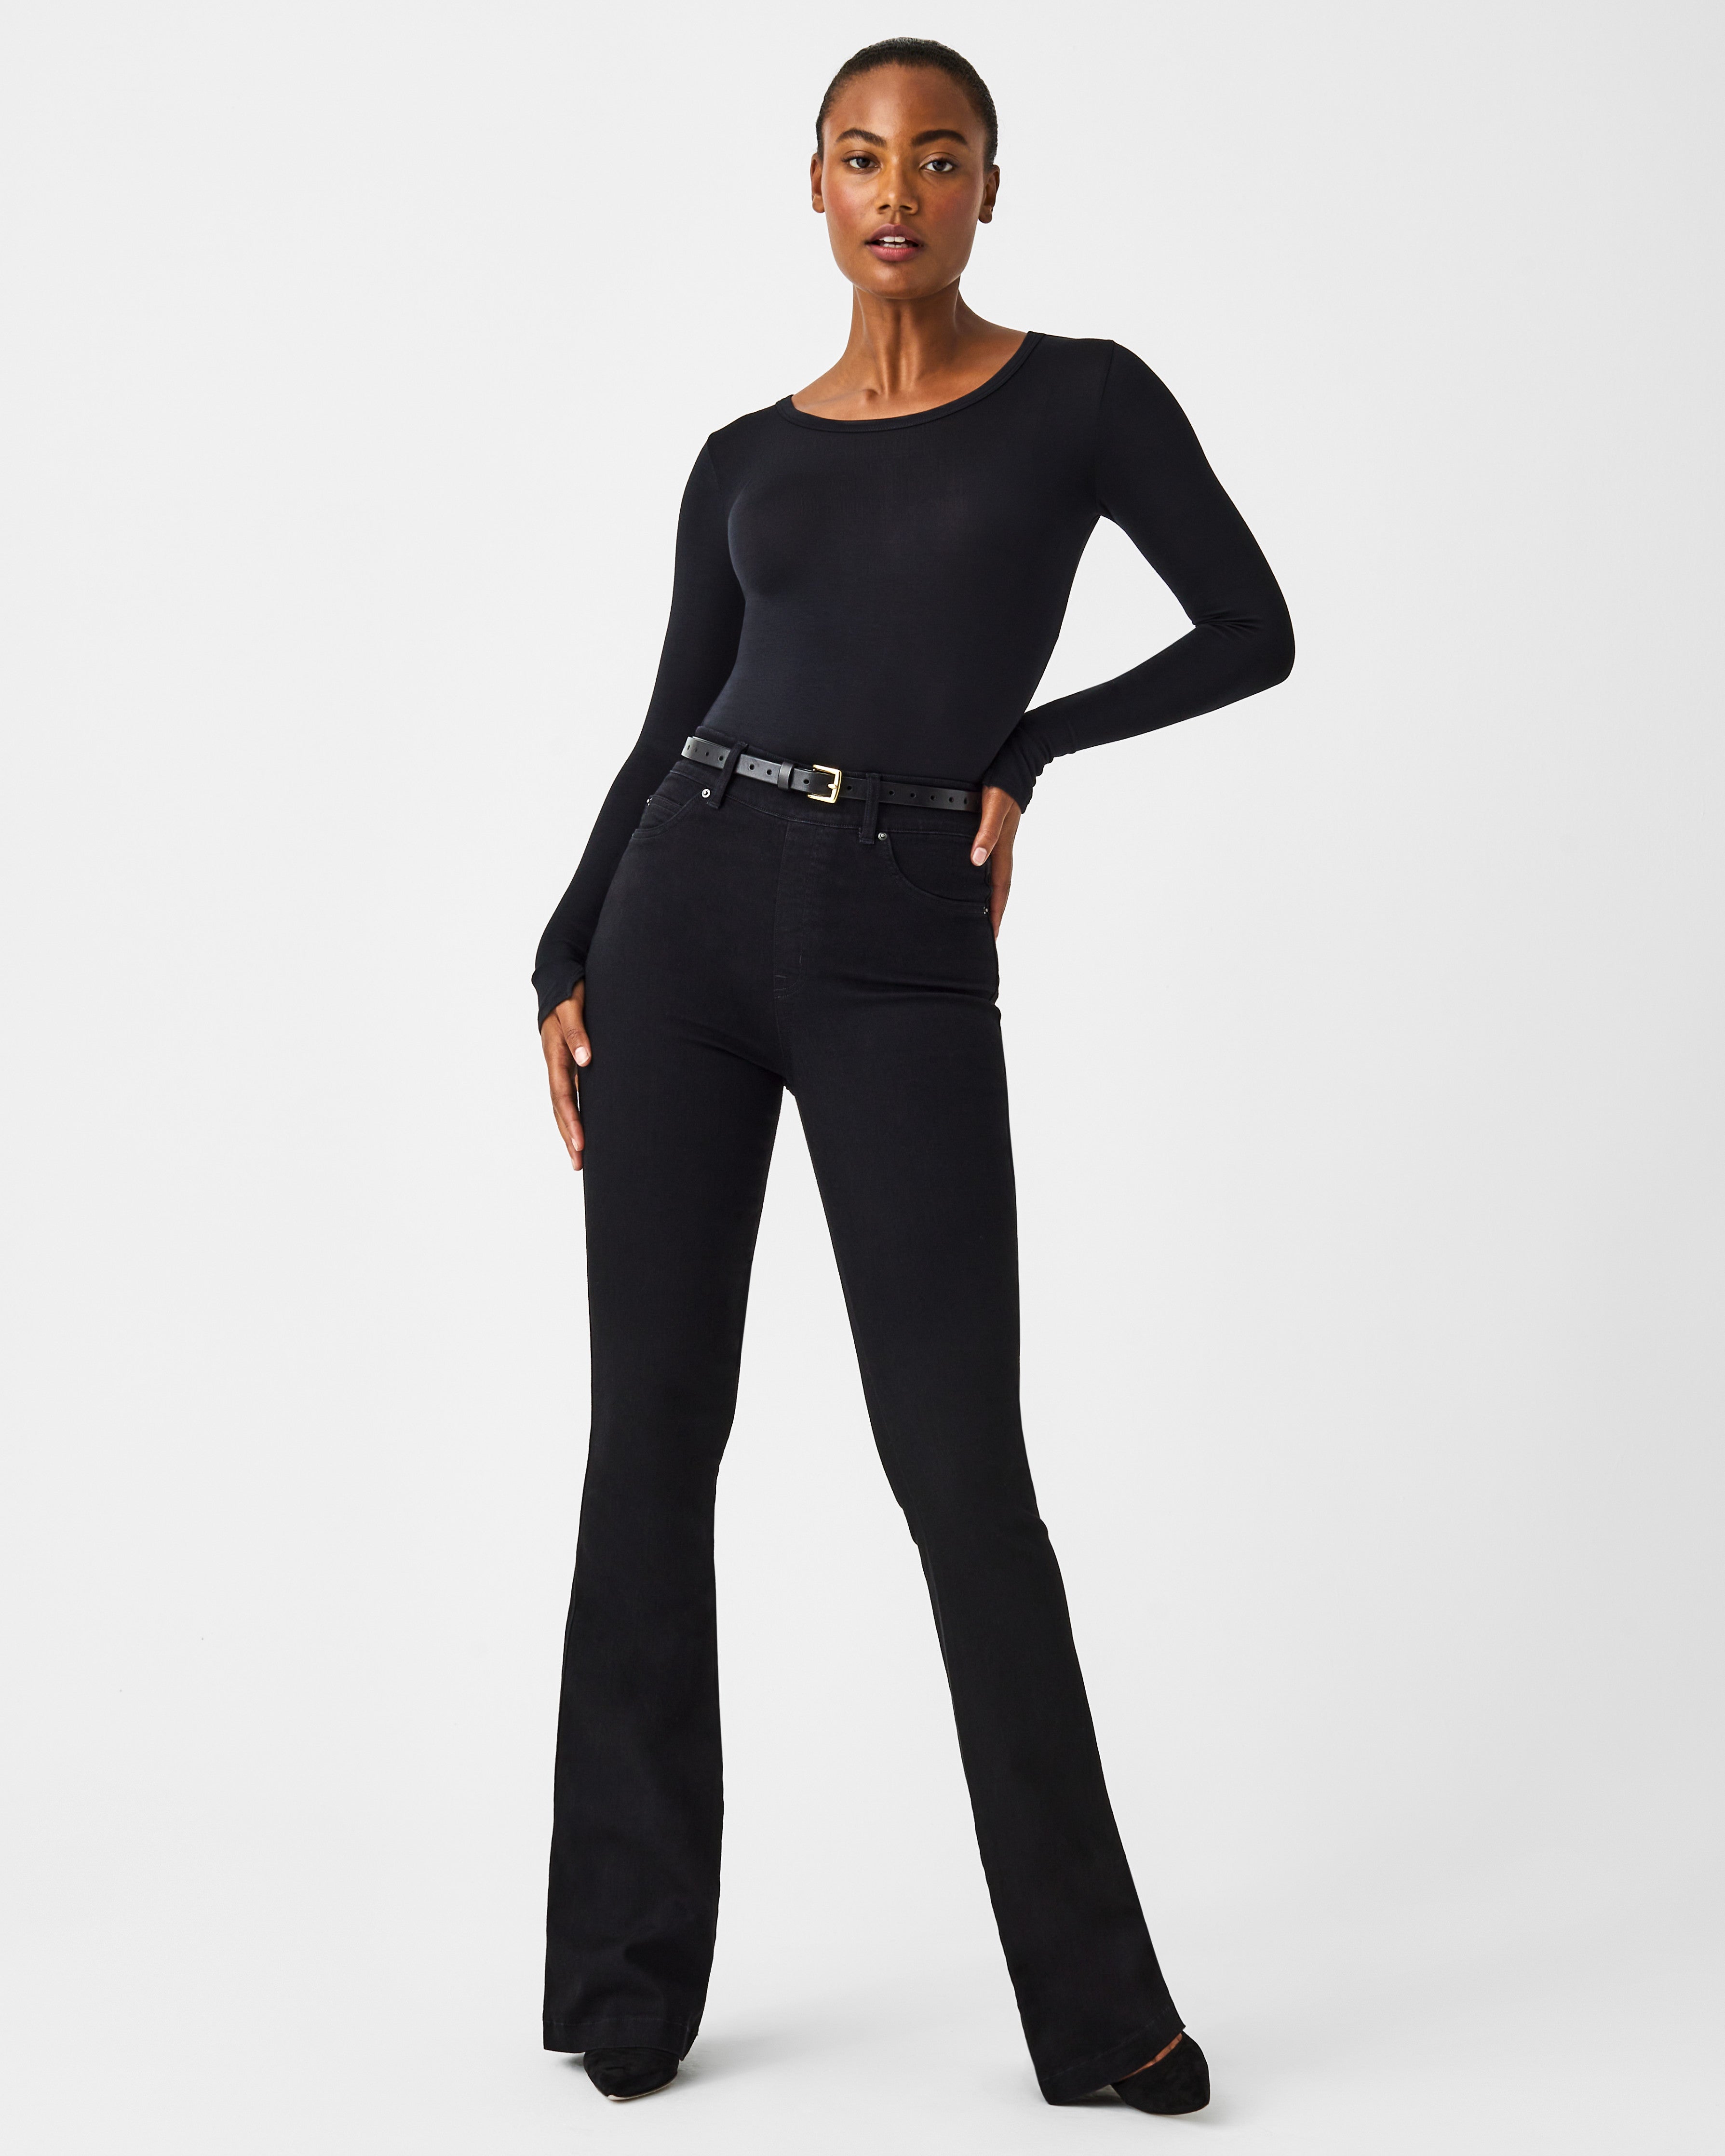 Spanx® Perfect Pant Hi-Rise Flare in Black – Ali On The Boulevard